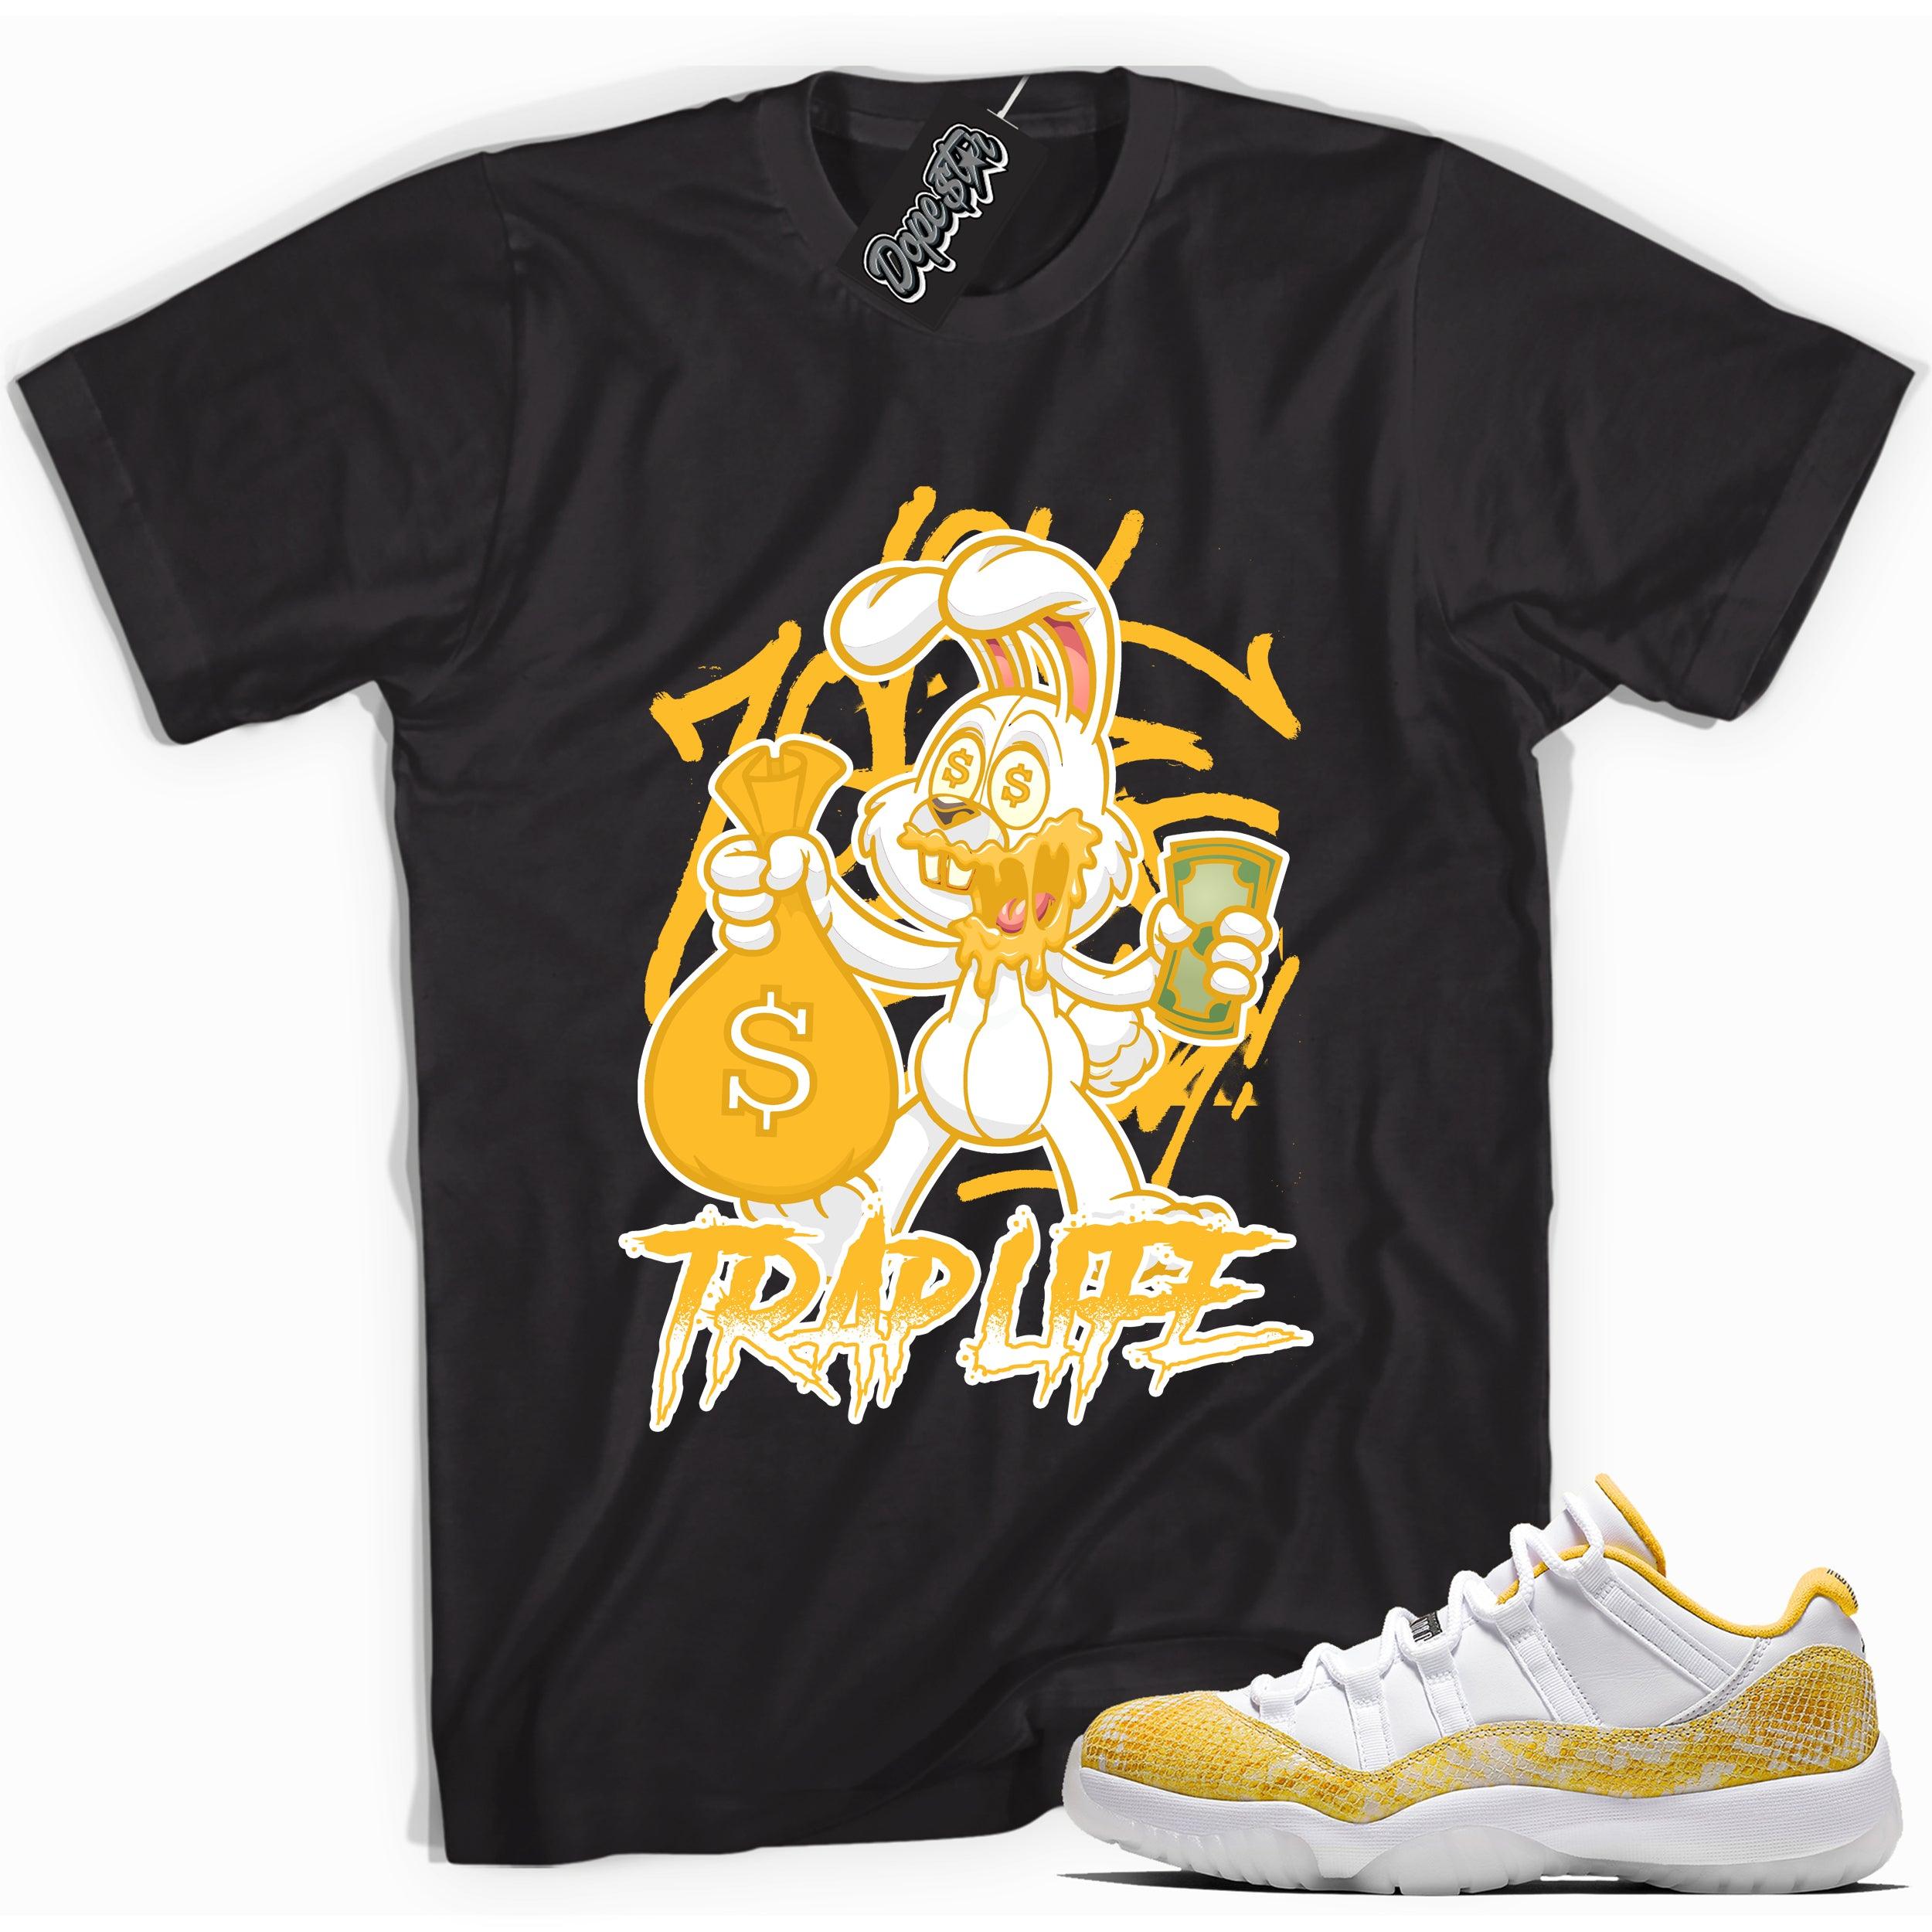 Cool black graphic tee with 'trap life rabbit' print, that perfectly matches  Air Jordan 11 Retro Low Yellow Snakeskin sneakers